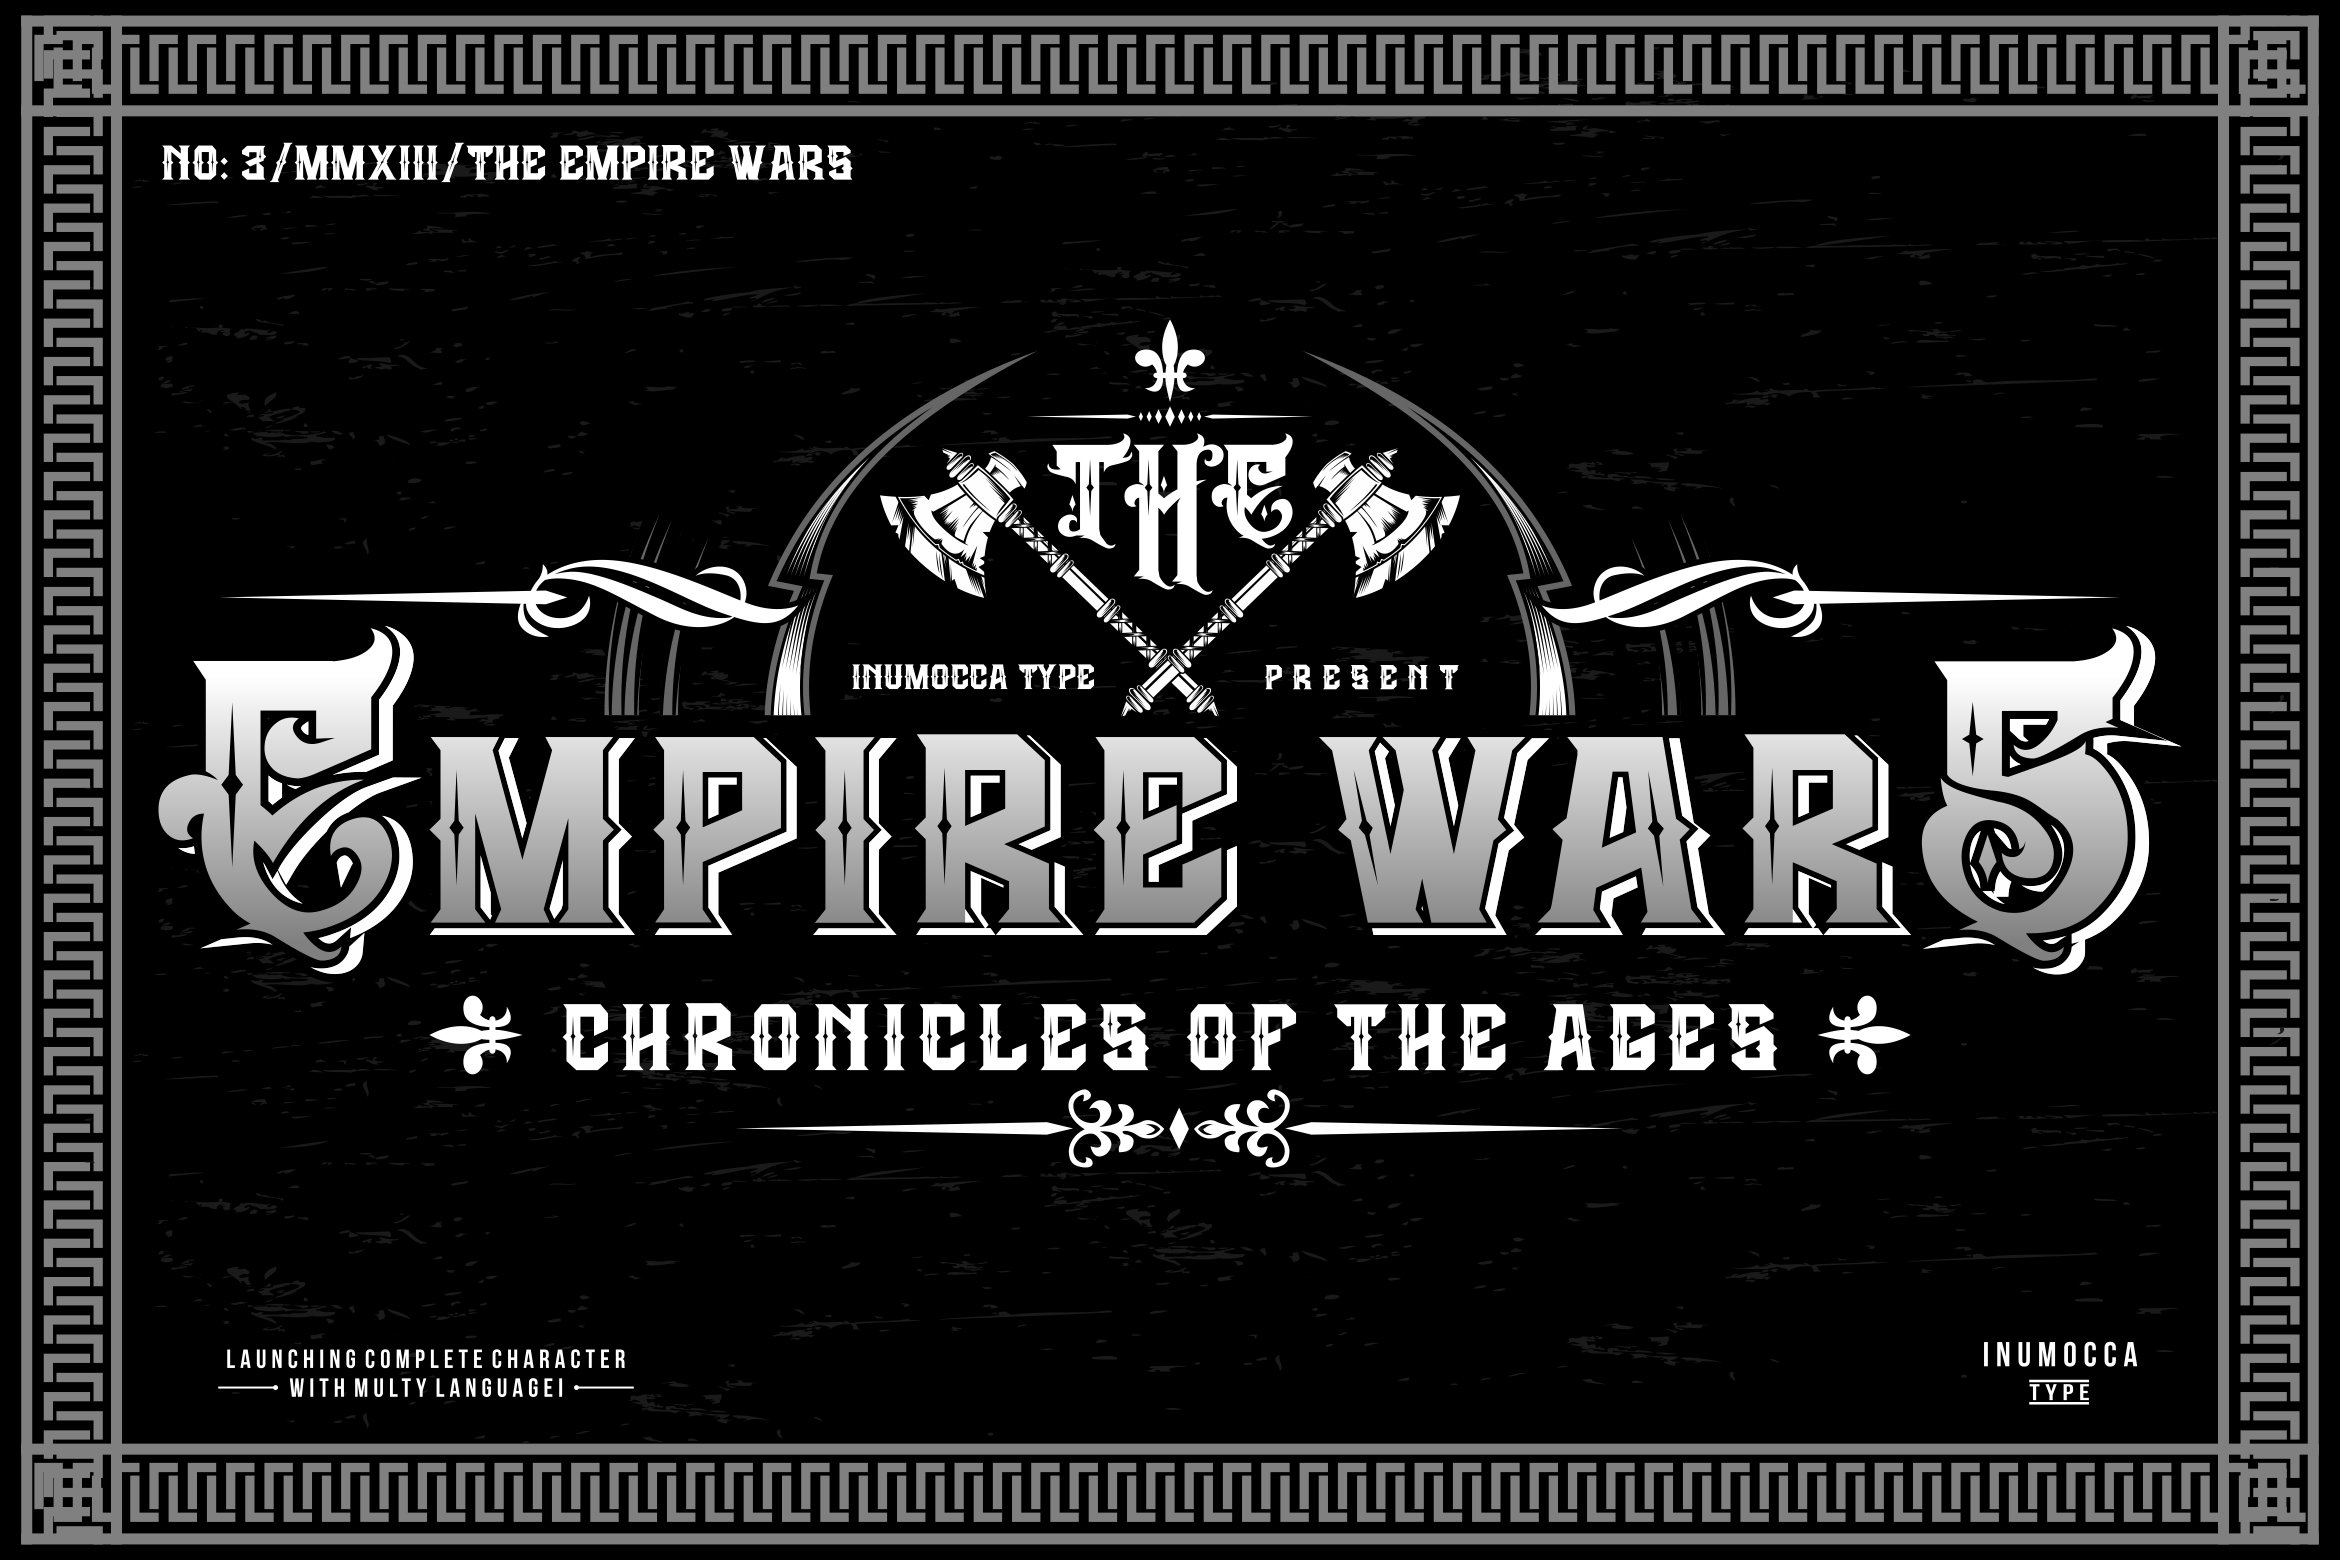 The Empire Wars (family font) cover image.